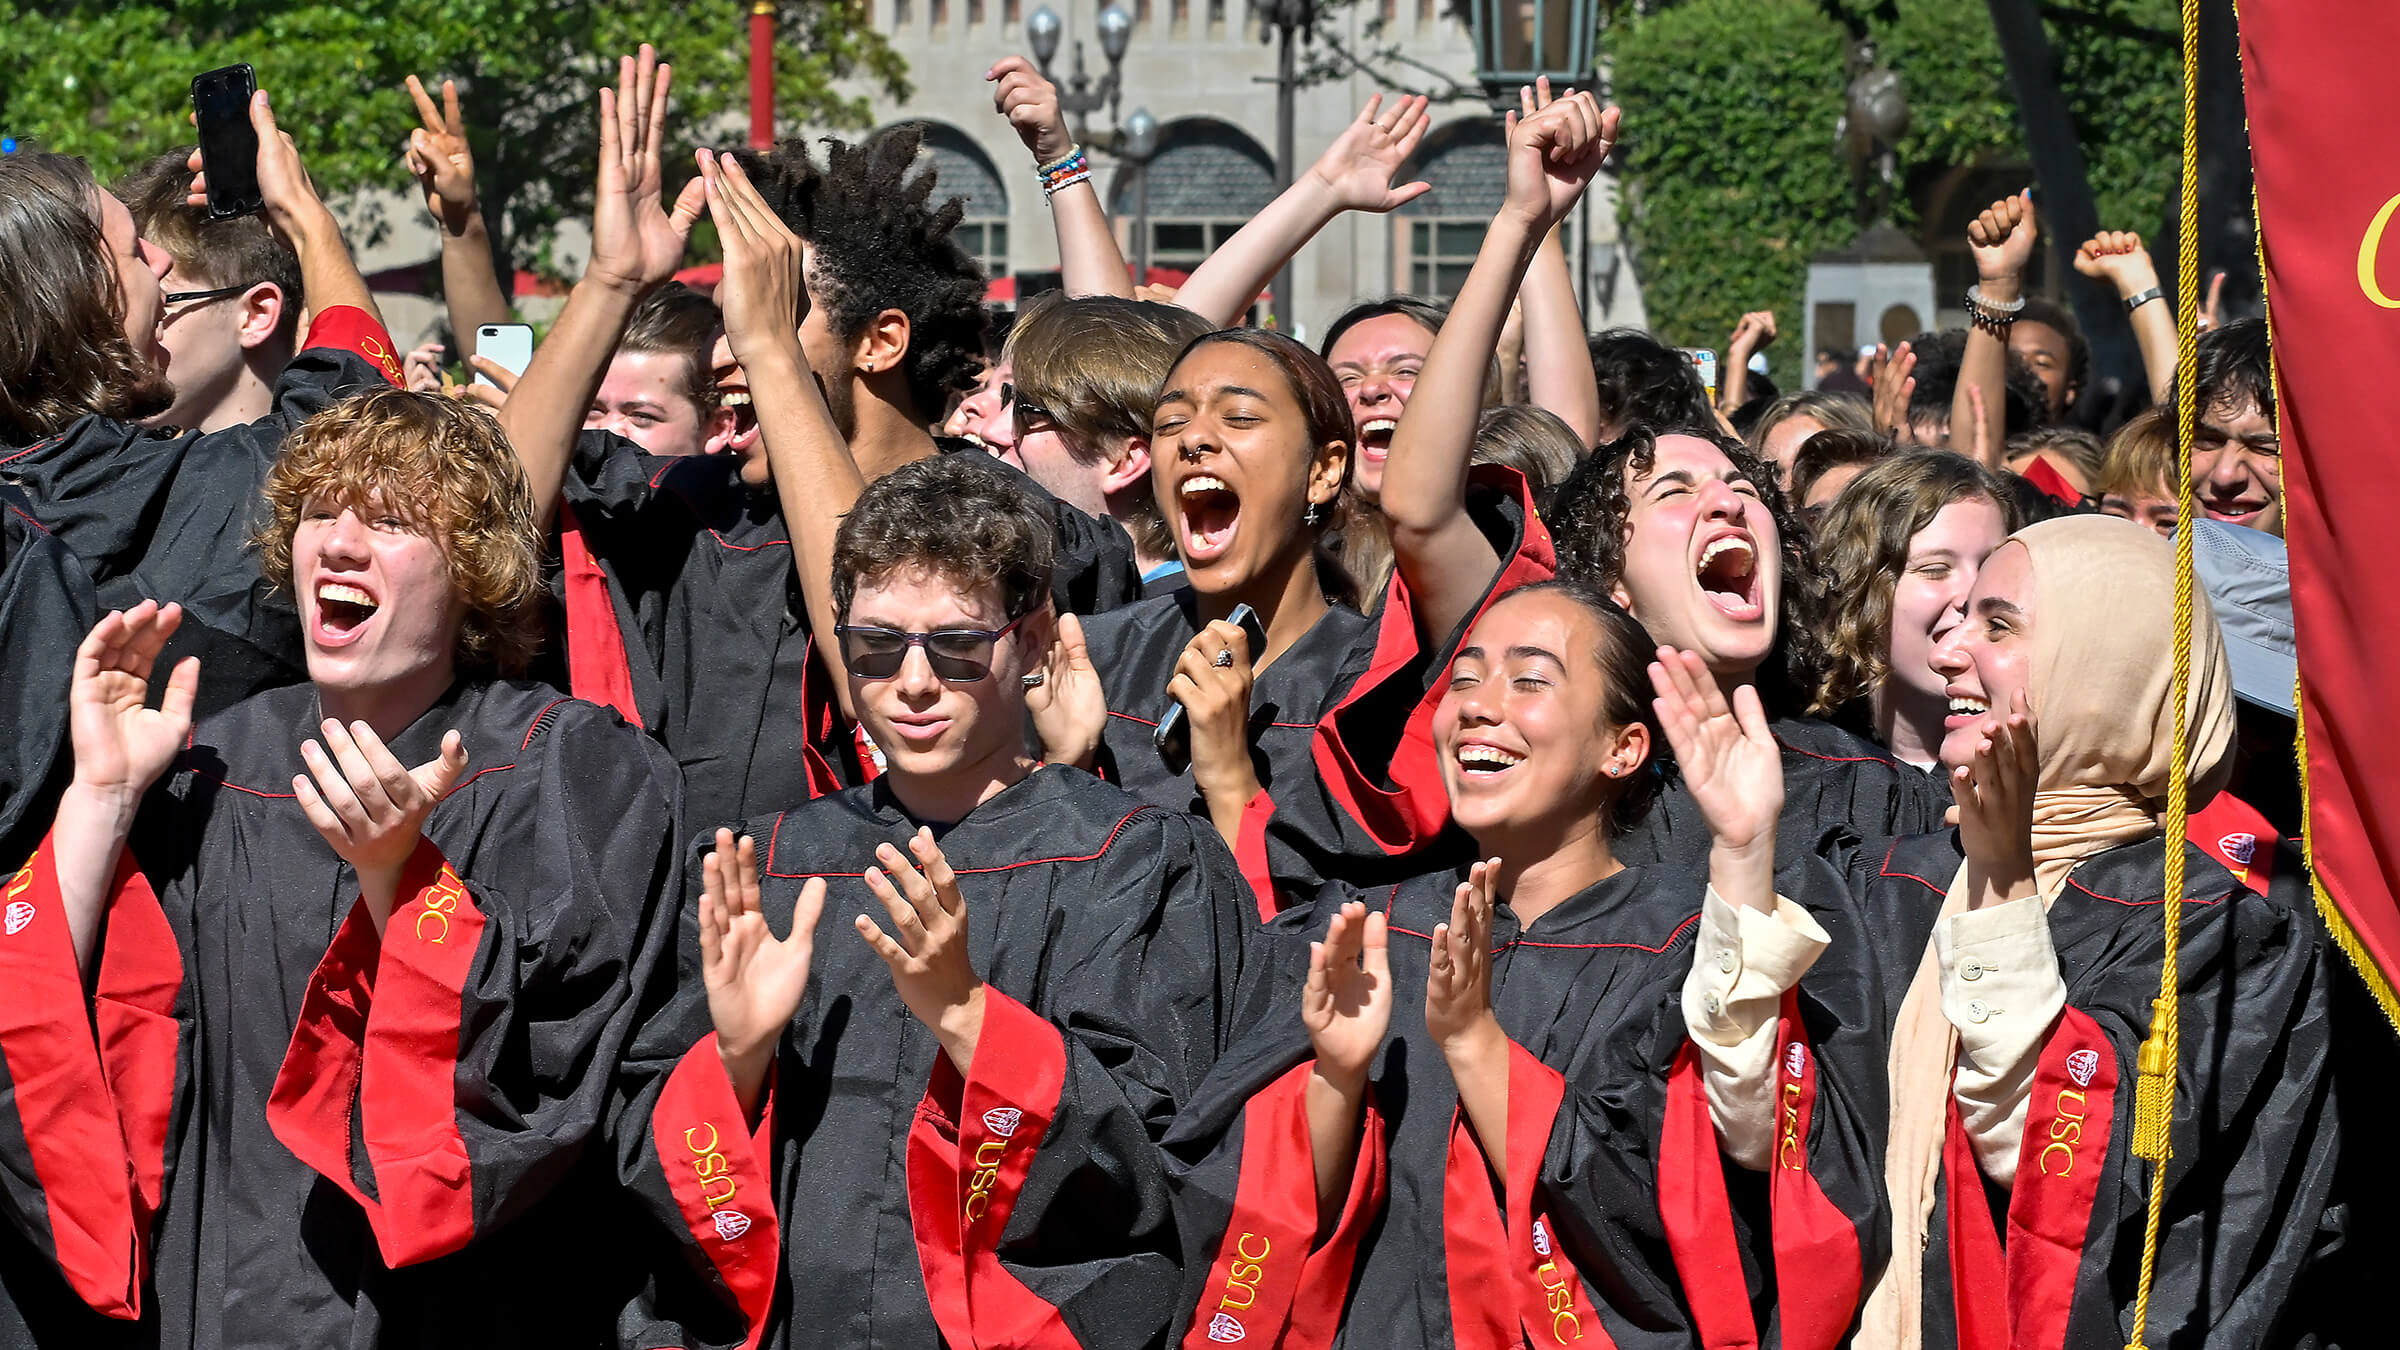 Incoming Trojans in graduation gowns clap and cheer as their school is introduced during USC’s new student convocation.